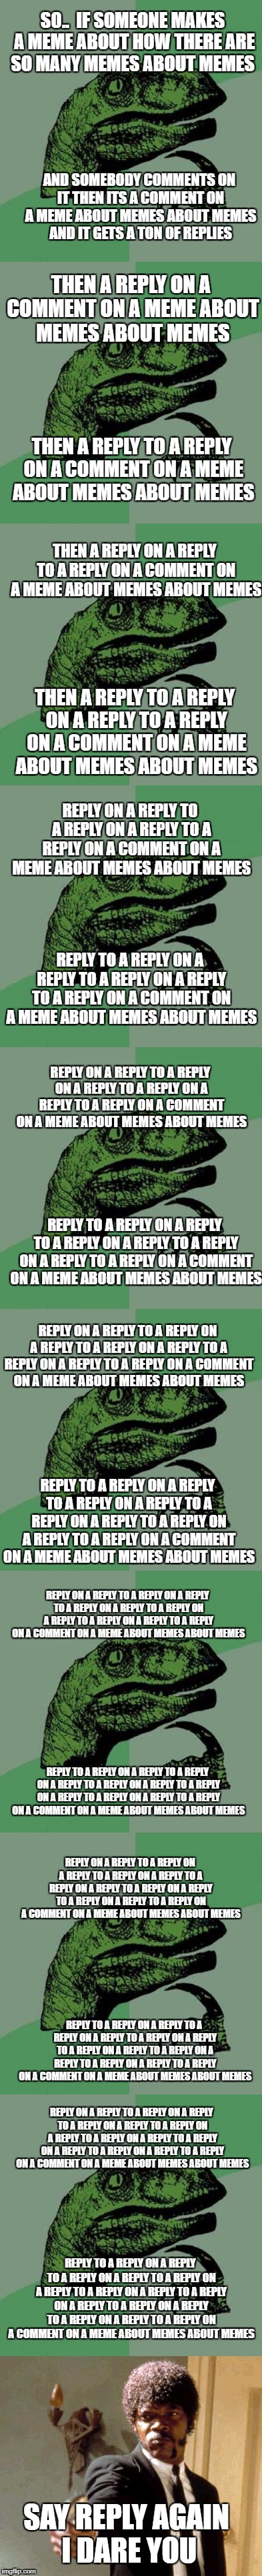 Title about meme about replies to replies on replies to replies on replies to replies on replies... | SO..  IF SOMEONE MAKES A MEME ABOUT HOW THERE ARE SO MANY MEMES ABOUT MEMES; AND SOMEBODY COMMENTS ON IT THEN ITS A COMMENT ON A MEME ABOUT MEMES ABOUT MEMES AND IT GETS A TON OF REPLIES; THEN A REPLY ON A COMMENT ON A MEME ABOUT MEMES ABOUT MEMES; THEN A REPLY TO A REPLY ON A COMMENT ON A MEME ABOUT MEMES ABOUT MEMES; THEN A REPLY ON A REPLY TO A REPLY ON A COMMENT ON A MEME ABOUT MEMES ABOUT MEMES; THEN A REPLY TO A REPLY ON A REPLY TO A REPLY ON A COMMENT ON A MEME ABOUT MEMES ABOUT MEMES; REPLY ON A REPLY TO A REPLY ON A REPLY TO A REPLY ON A COMMENT ON A MEME ABOUT MEMES ABOUT MEMES; REPLY TO A REPLY ON A REPLY TO A REPLY ON A REPLY TO A REPLY ON A COMMENT ON A MEME ABOUT MEMES ABOUT MEMES; REPLY ON A REPLY TO A REPLY ON A REPLY TO A REPLY ON A REPLY TO A REPLY ON A COMMENT ON A MEME ABOUT MEMES ABOUT MEMES; REPLY TO A REPLY ON A REPLY TO A REPLY ON A REPLY TO A REPLY ON A REPLY TO A REPLY ON A COMMENT ON A MEME ABOUT MEMES ABOUT MEMES; REPLY ON A REPLY TO A REPLY ON A REPLY TO A REPLY ON A REPLY TO A REPLY ON A REPLY TO A REPLY ON A COMMENT ON A MEME ABOUT MEMES ABOUT MEMES; REPLY TO A REPLY ON A REPLY TO A REPLY ON A REPLY TO A REPLY ON A REPLY TO A REPLY ON A REPLY TO A REPLY ON A COMMENT ON A MEME ABOUT MEMES ABOUT MEMES; REPLY ON A REPLY TO A REPLY ON A REPLY TO A REPLY ON A REPLY TO A REPLY ON A REPLY TO A REPLY ON A REPLY TO A REPLY ON A COMMENT ON A MEME ABOUT MEMES ABOUT MEMES; REPLY TO A REPLY ON A REPLY TO A REPLY ON A REPLY TO A REPLY ON A REPLY TO A REPLY ON A REPLY TO A REPLY ON A REPLY TO A REPLY ON A COMMENT ON A MEME ABOUT MEMES ABOUT MEMES; REPLY ON A REPLY TO A REPLY ON A REPLY TO A REPLY ON A REPLY TO A REPLY ON A REPLY TO A REPLY ON A REPLY TO A REPLY ON A REPLY TO A REPLY ON A COMMENT ON A MEME ABOUT MEMES ABOUT MEMES; REPLY TO A REPLY ON A REPLY TO A REPLY ON A REPLY TO A REPLY ON A REPLY TO A REPLY ON A REPLY TO A REPLY ON A REPLY TO A REPLY ON A REPLY TO A REPLY ON A COMMENT ON A MEME ABOUT MEMES ABOUT MEMES; REPLY ON A REPLY TO A REPLY ON A REPLY TO A REPLY ON A REPLY TO A REPLY ON A REPLY TO A REPLY ON A REPLY TO A REPLY ON A REPLY TO A REPLY ON A REPLY TO A REPLY ON A COMMENT ON A MEME ABOUT MEMES ABOUT MEMES; REPLY TO A REPLY ON A REPLY TO A REPLY ON A REPLY TO A REPLY ON A REPLY TO A REPLY ON A REPLY TO A REPLY ON A REPLY TO A REPLY ON A REPLY TO A REPLY ON A REPLY TO A REPLY ON A COMMENT ON A MEME ABOUT MEMES ABOUT MEMES; SAY REPLY AGAIN I DARE YOU | image tagged in random tag,random tag about random tag,random tag about random tag about random tag,random tag about random tag about random tag | made w/ Imgflip meme maker